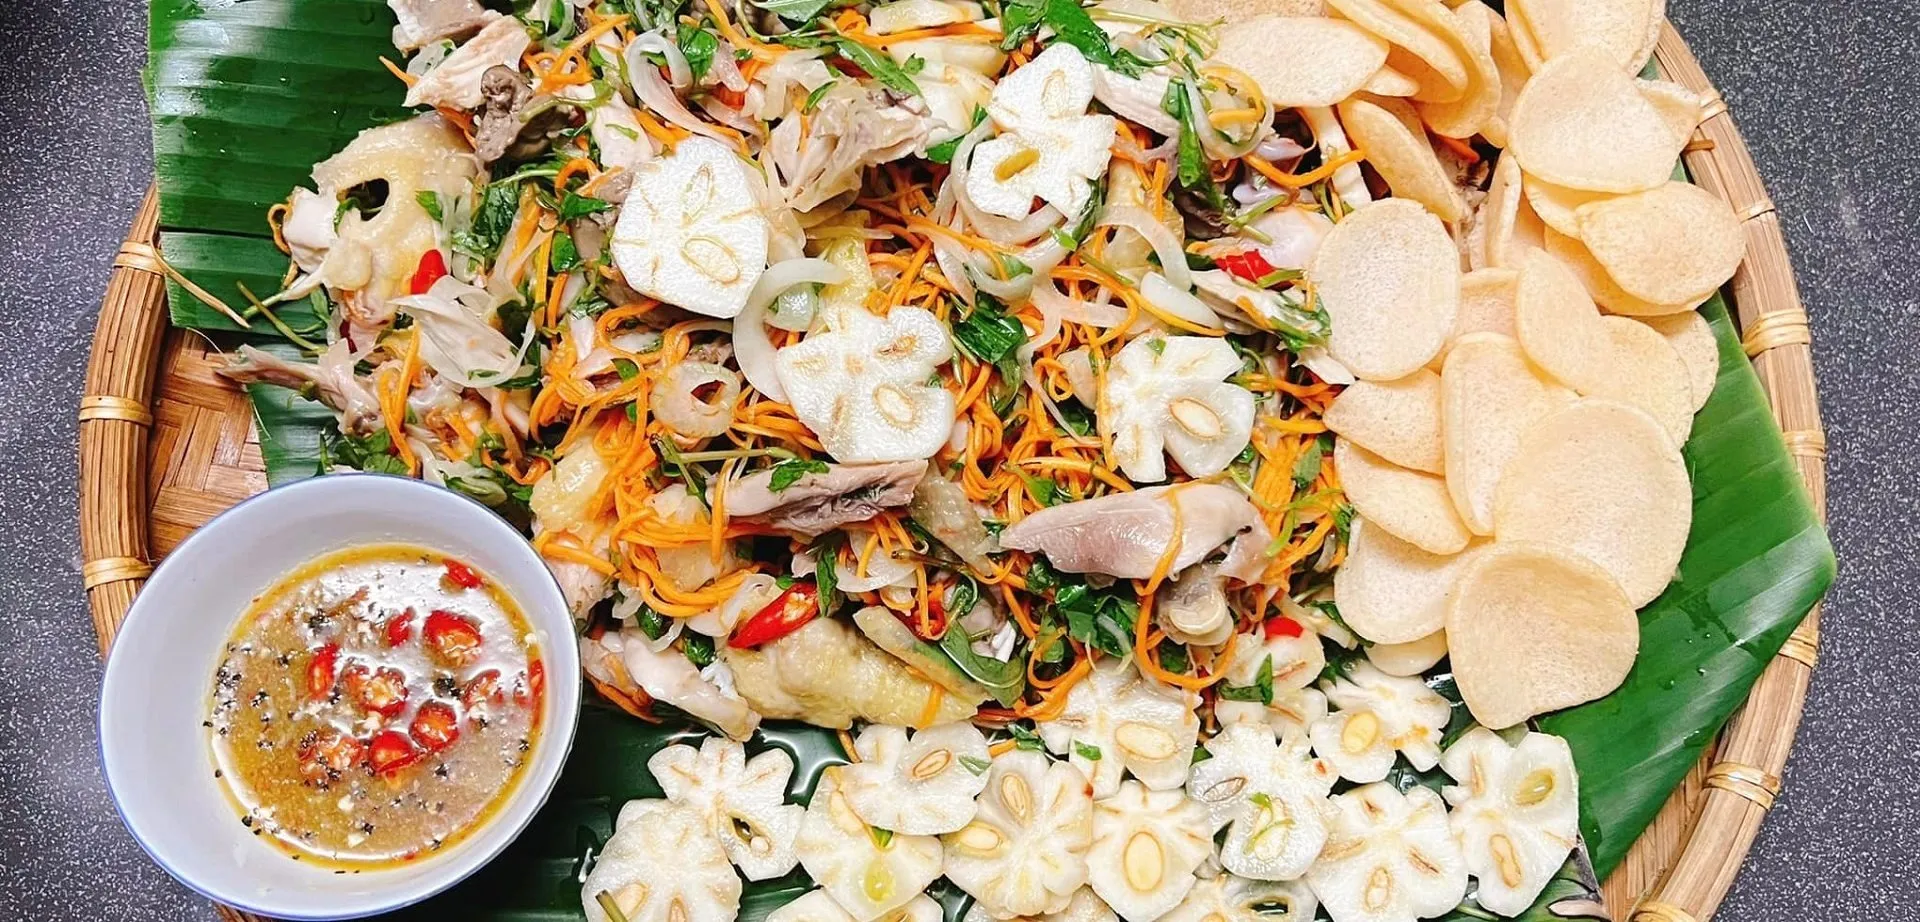 Vietnamese chicken salad is extremely attractive to tourists upon arrival